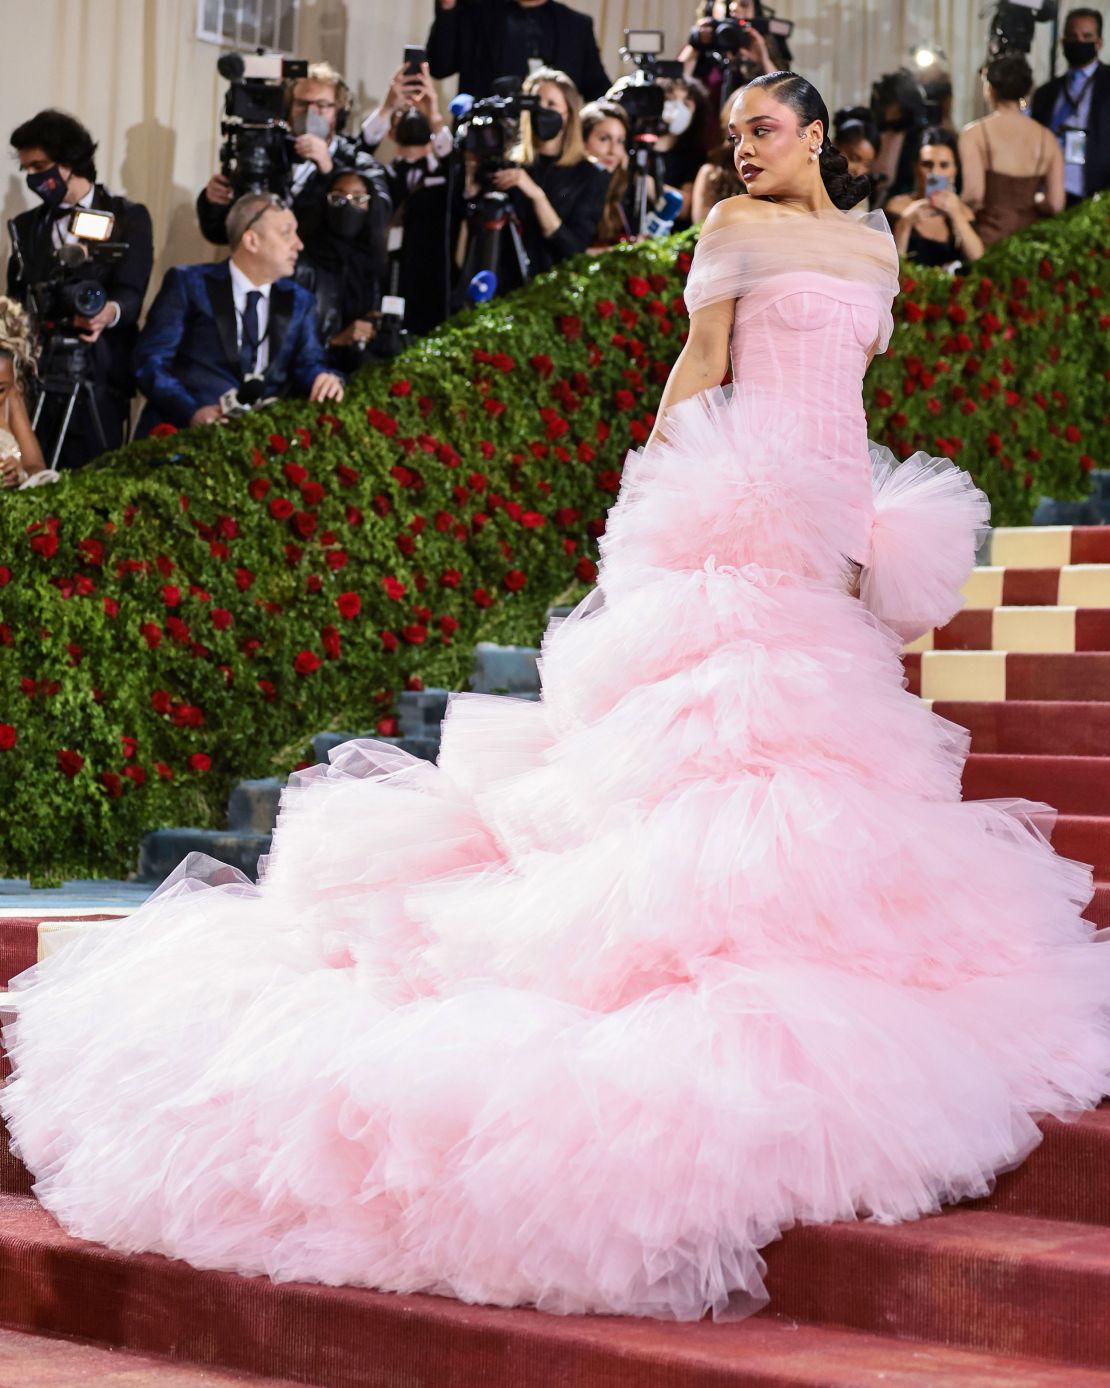 Tessa Thompson's pink Carolina Hererra gown featured one of the evening's most dramatic trains. She completed the look with vegan Piferi boots.